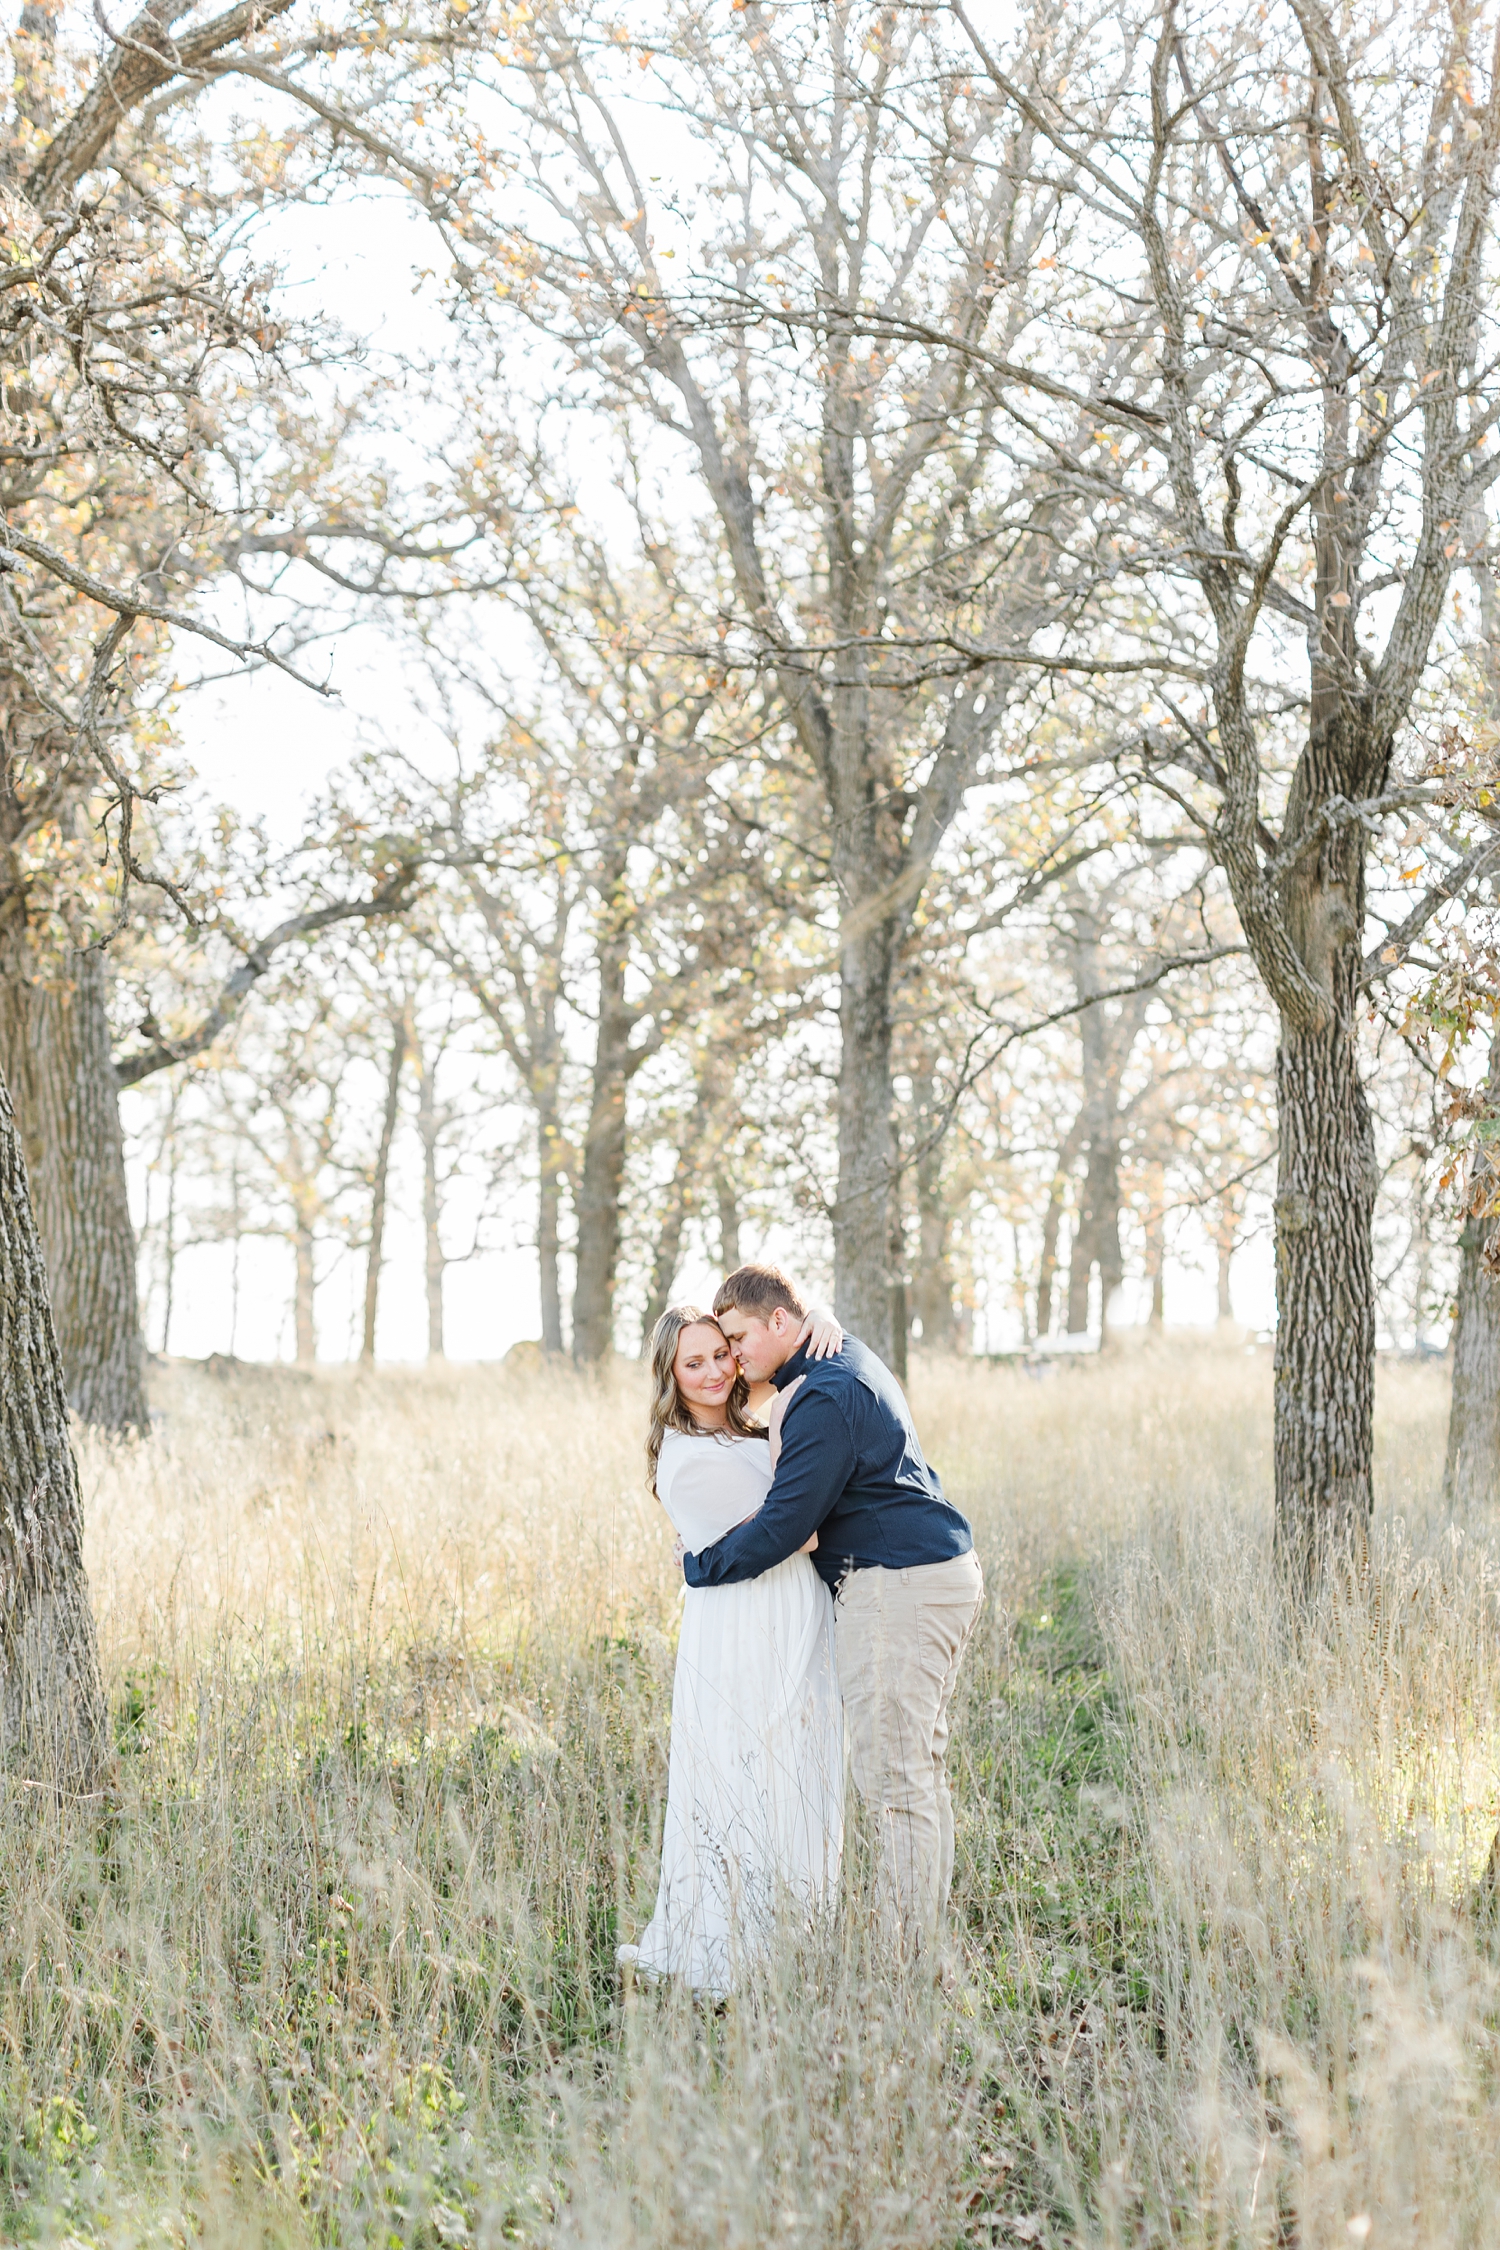 Taylor nuzzles Shelby in the middle of a field of oak trees in the fall | CB Studio